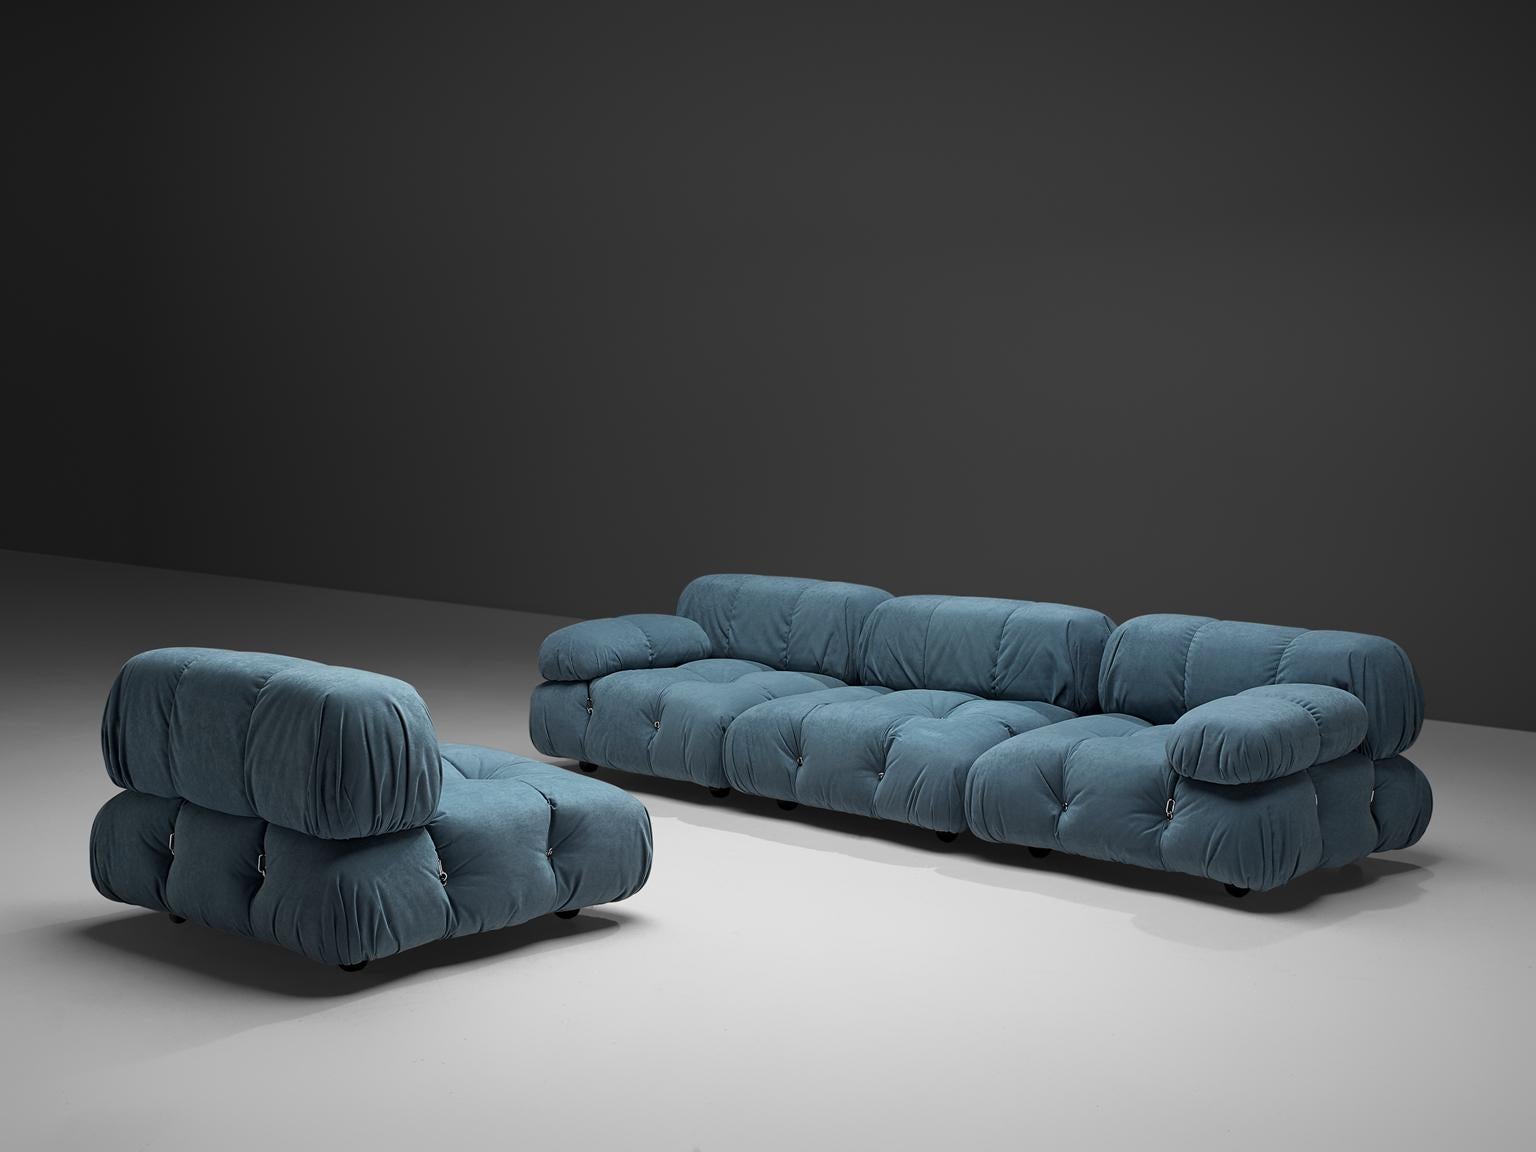 Mario Bellini, modular 'Cameleonda' sofa in in light blue, Italy, 1972.

The sectional elements of this sofa can be used freely and apart from one another. The upholstery on this piece features an blue original velvet. The backs are provided with